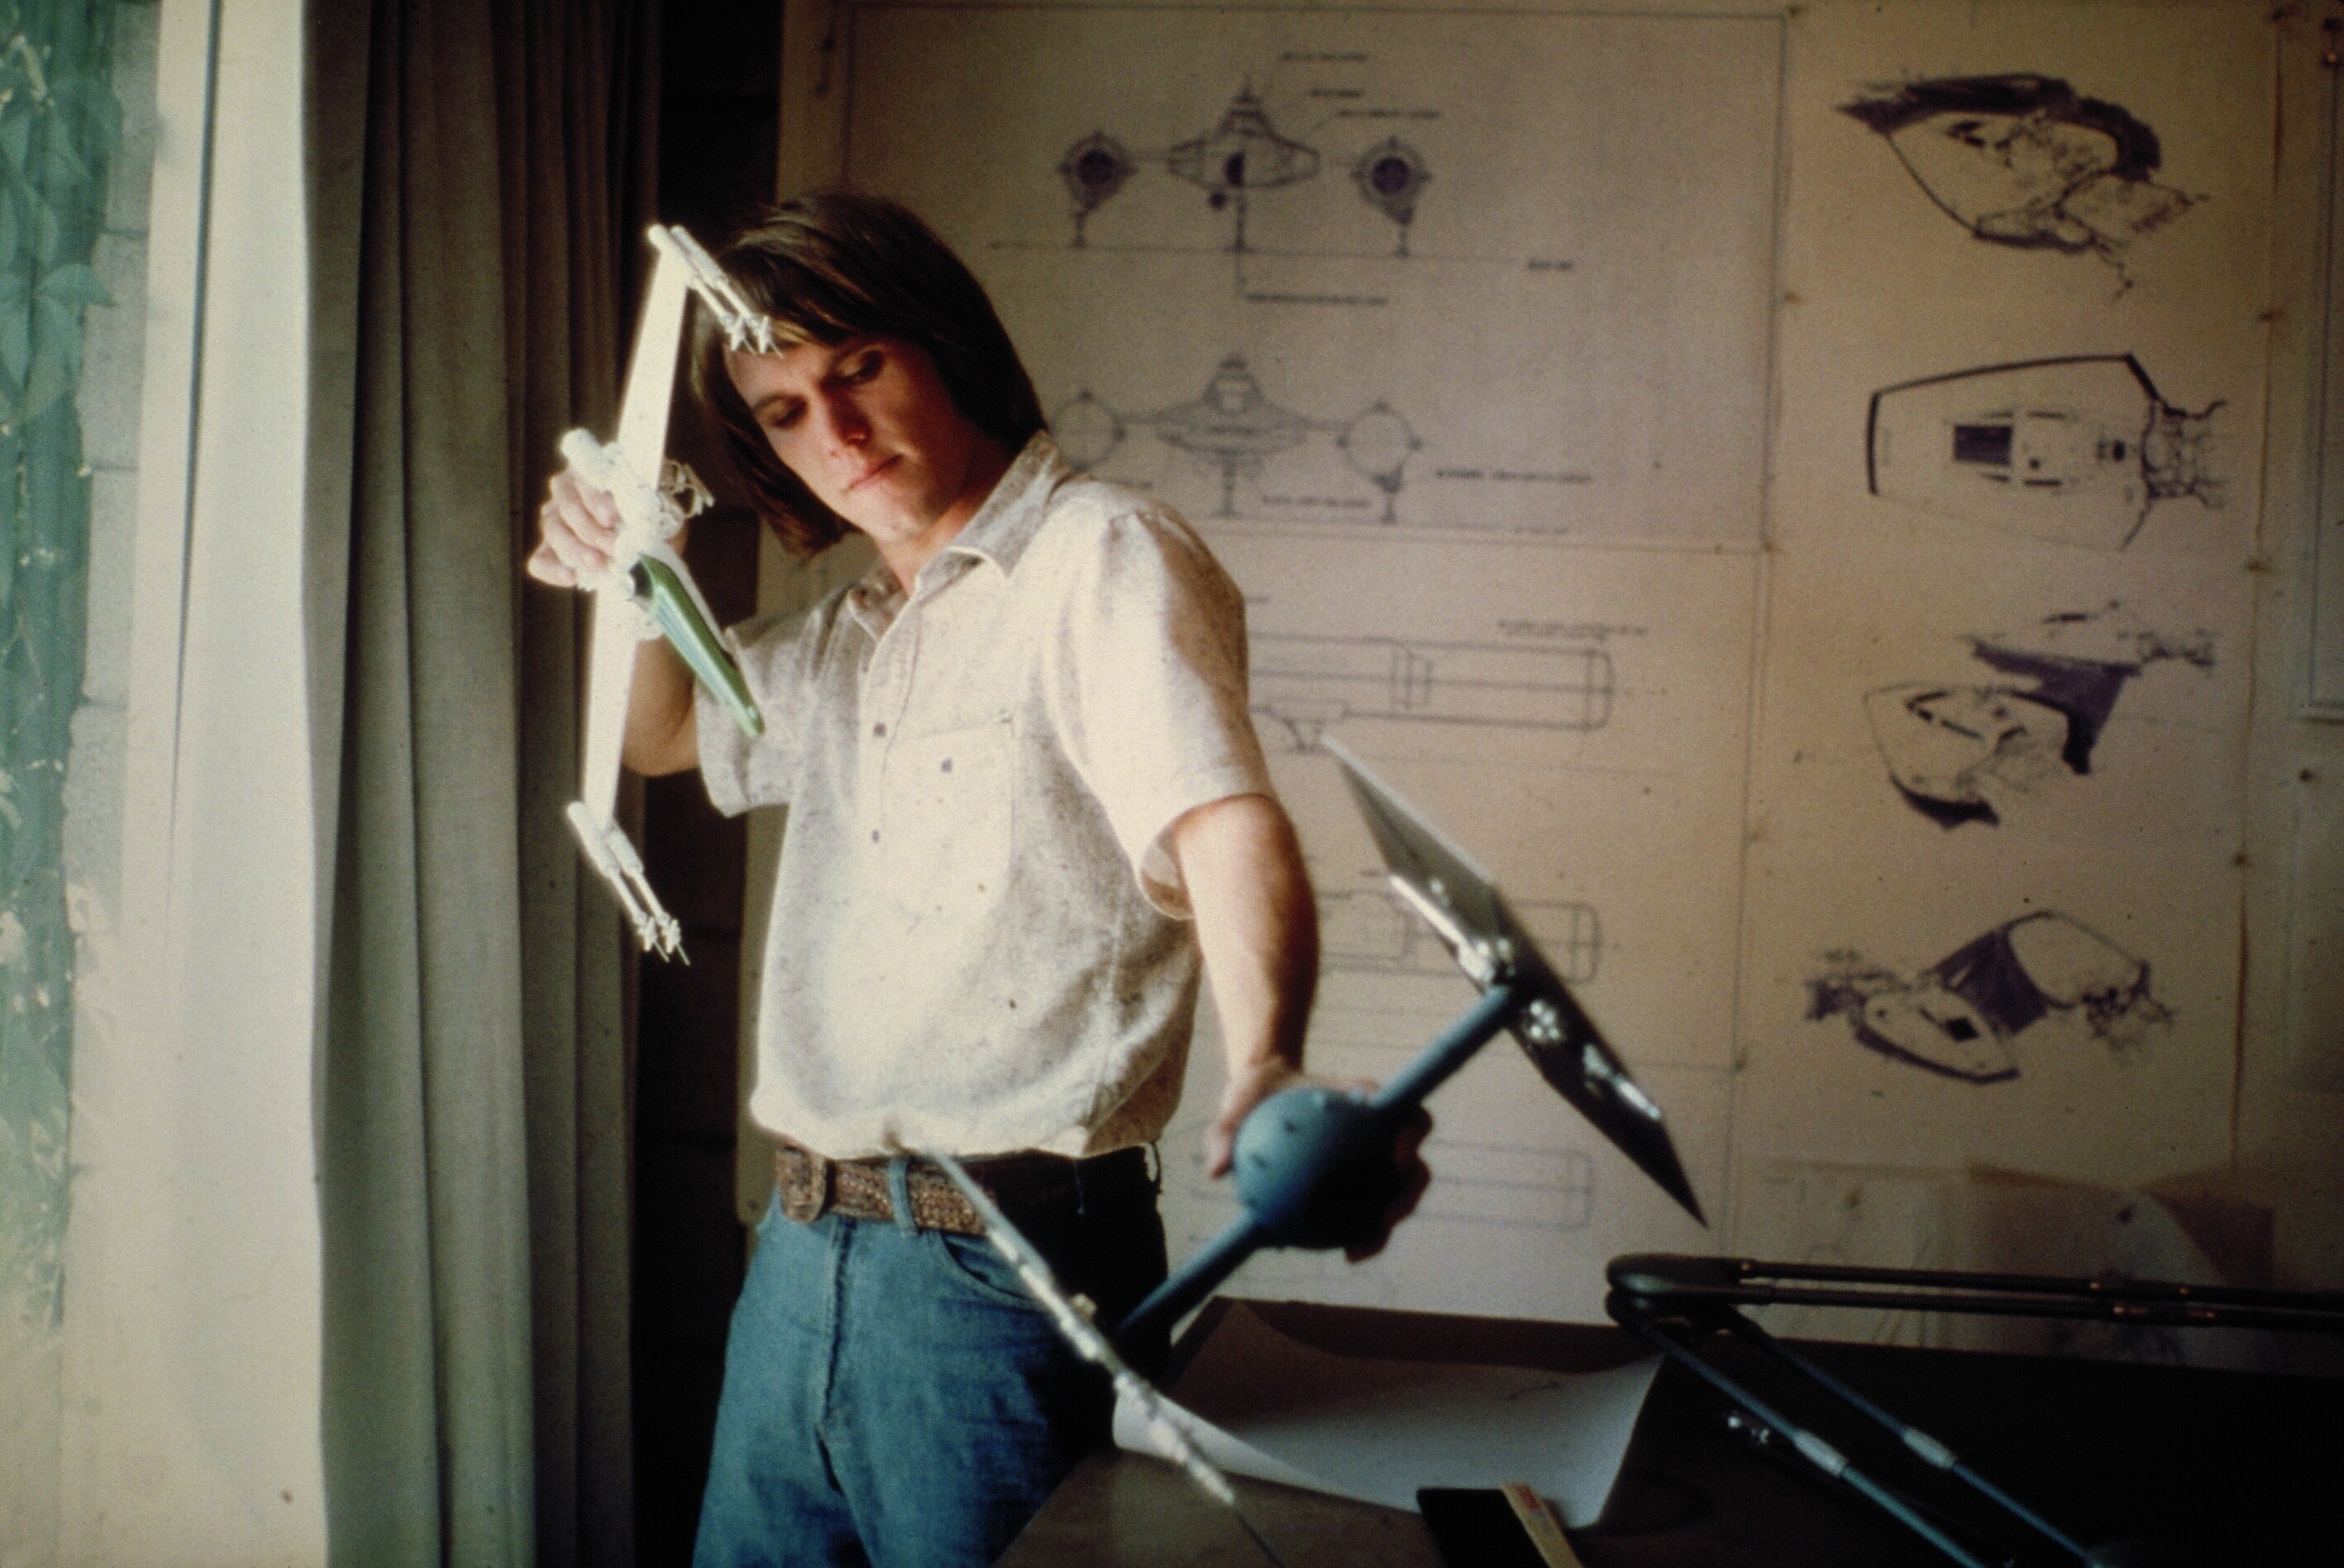 Concept artist and effects technician Joe Johnston with X-wing and TIE fighter models.